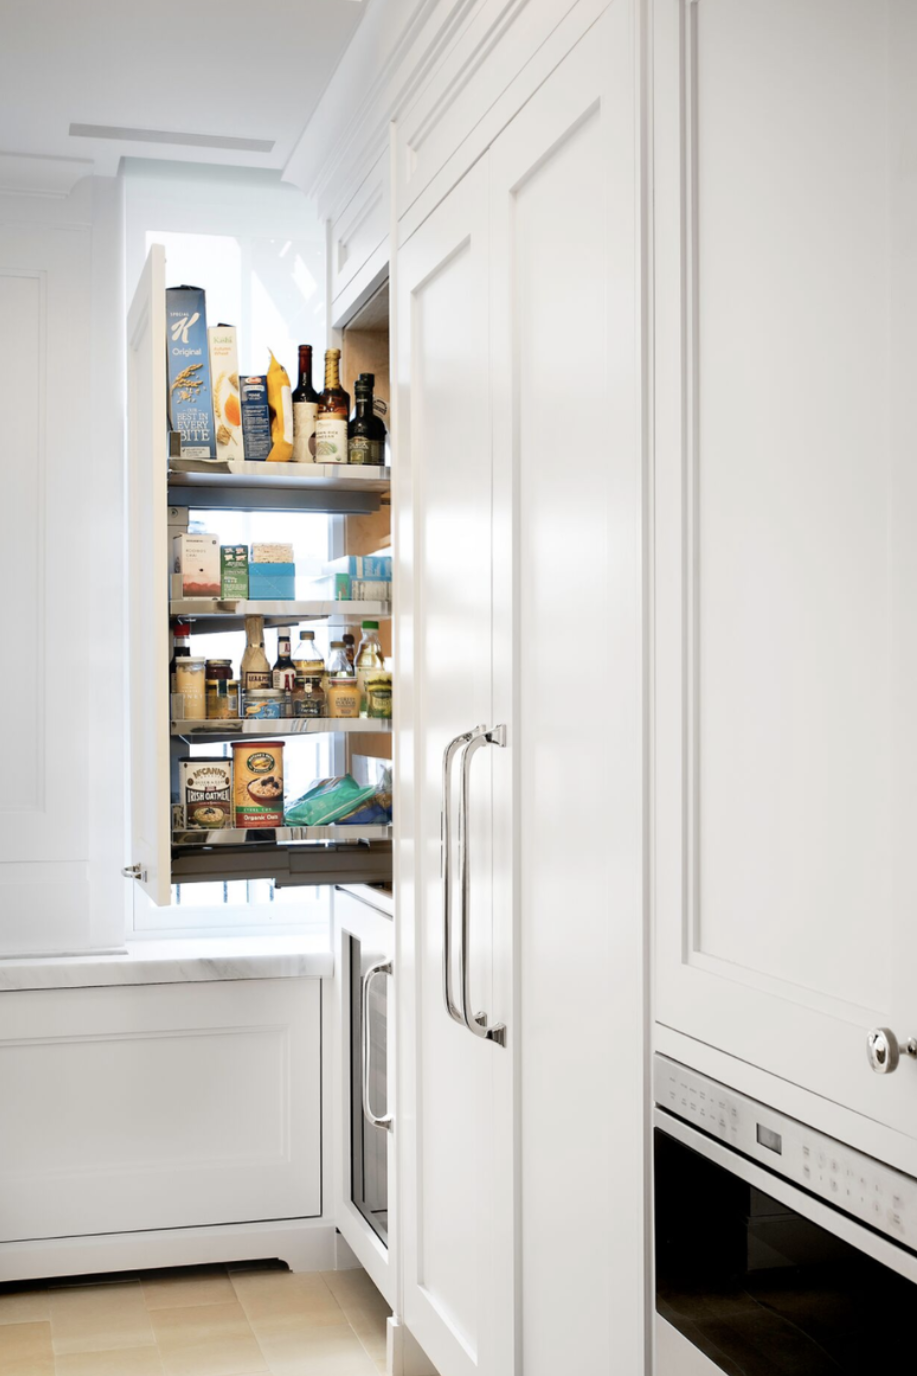 The 9 Best Pantry Organization Bins and Shelves of 2023